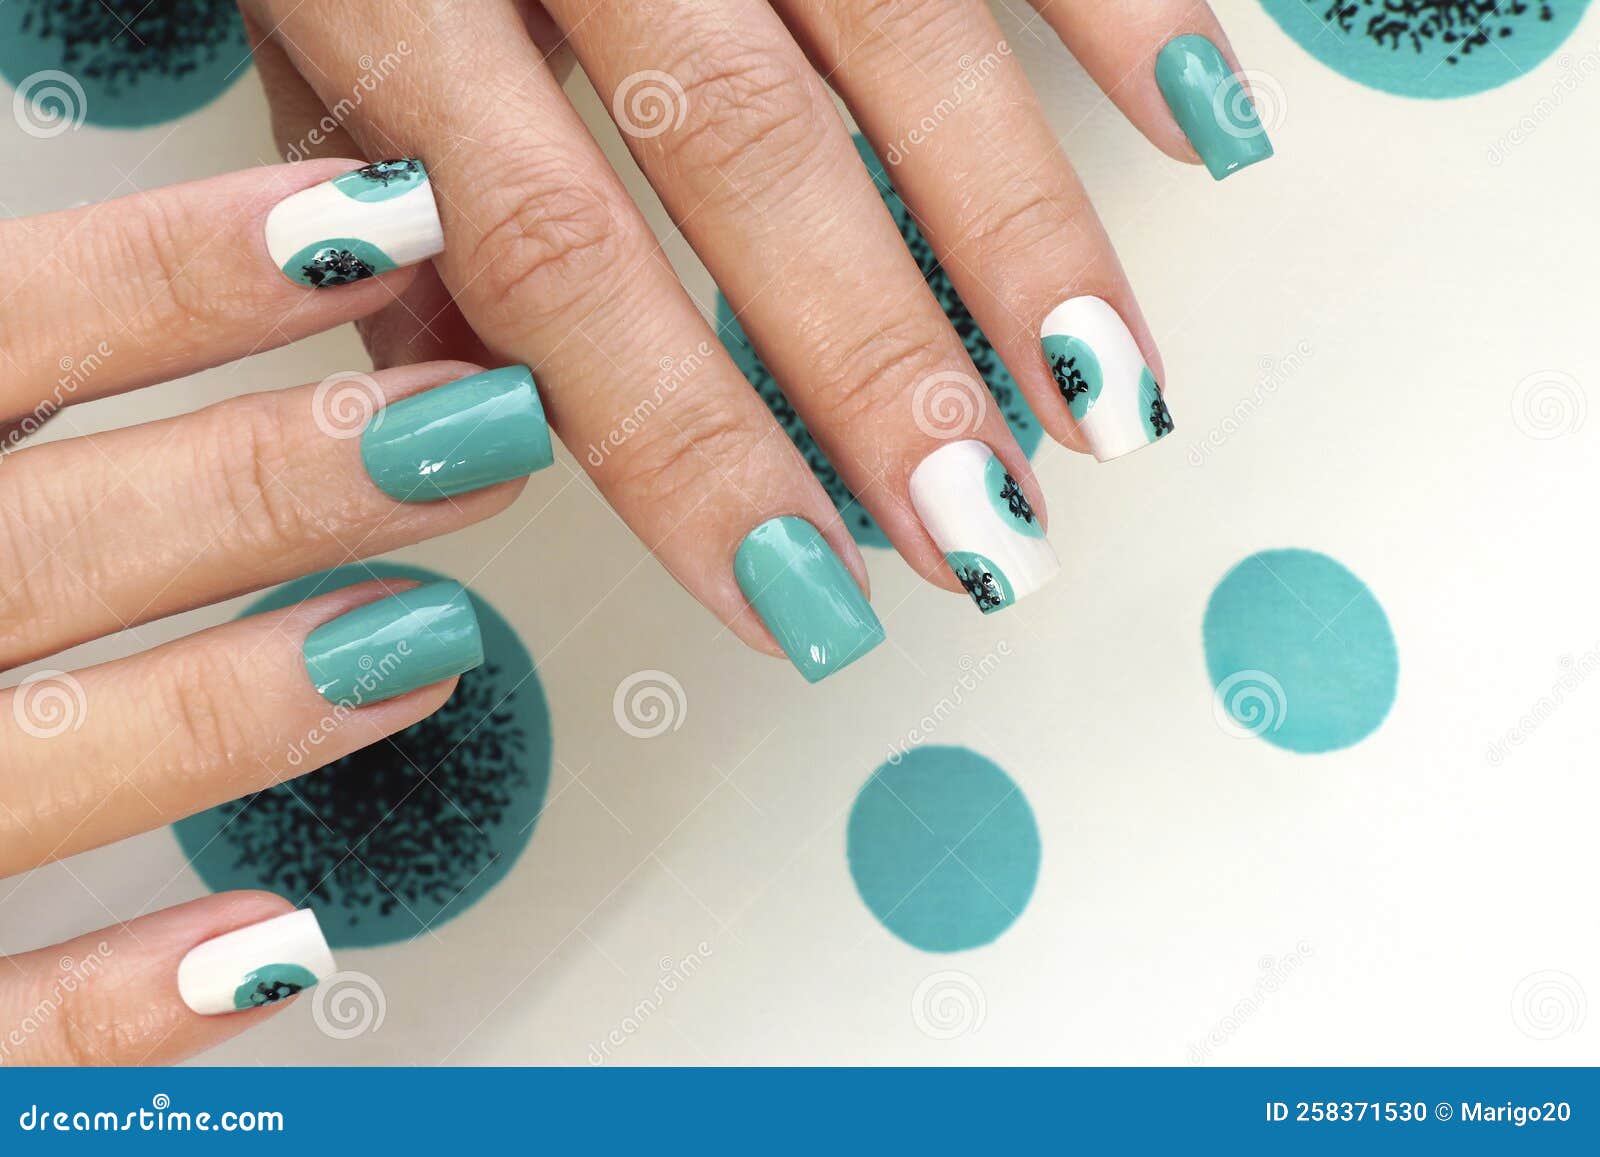 PhD nails: 40 great nail art ideas:Turquoise plaid nail design glowing in  the dark.